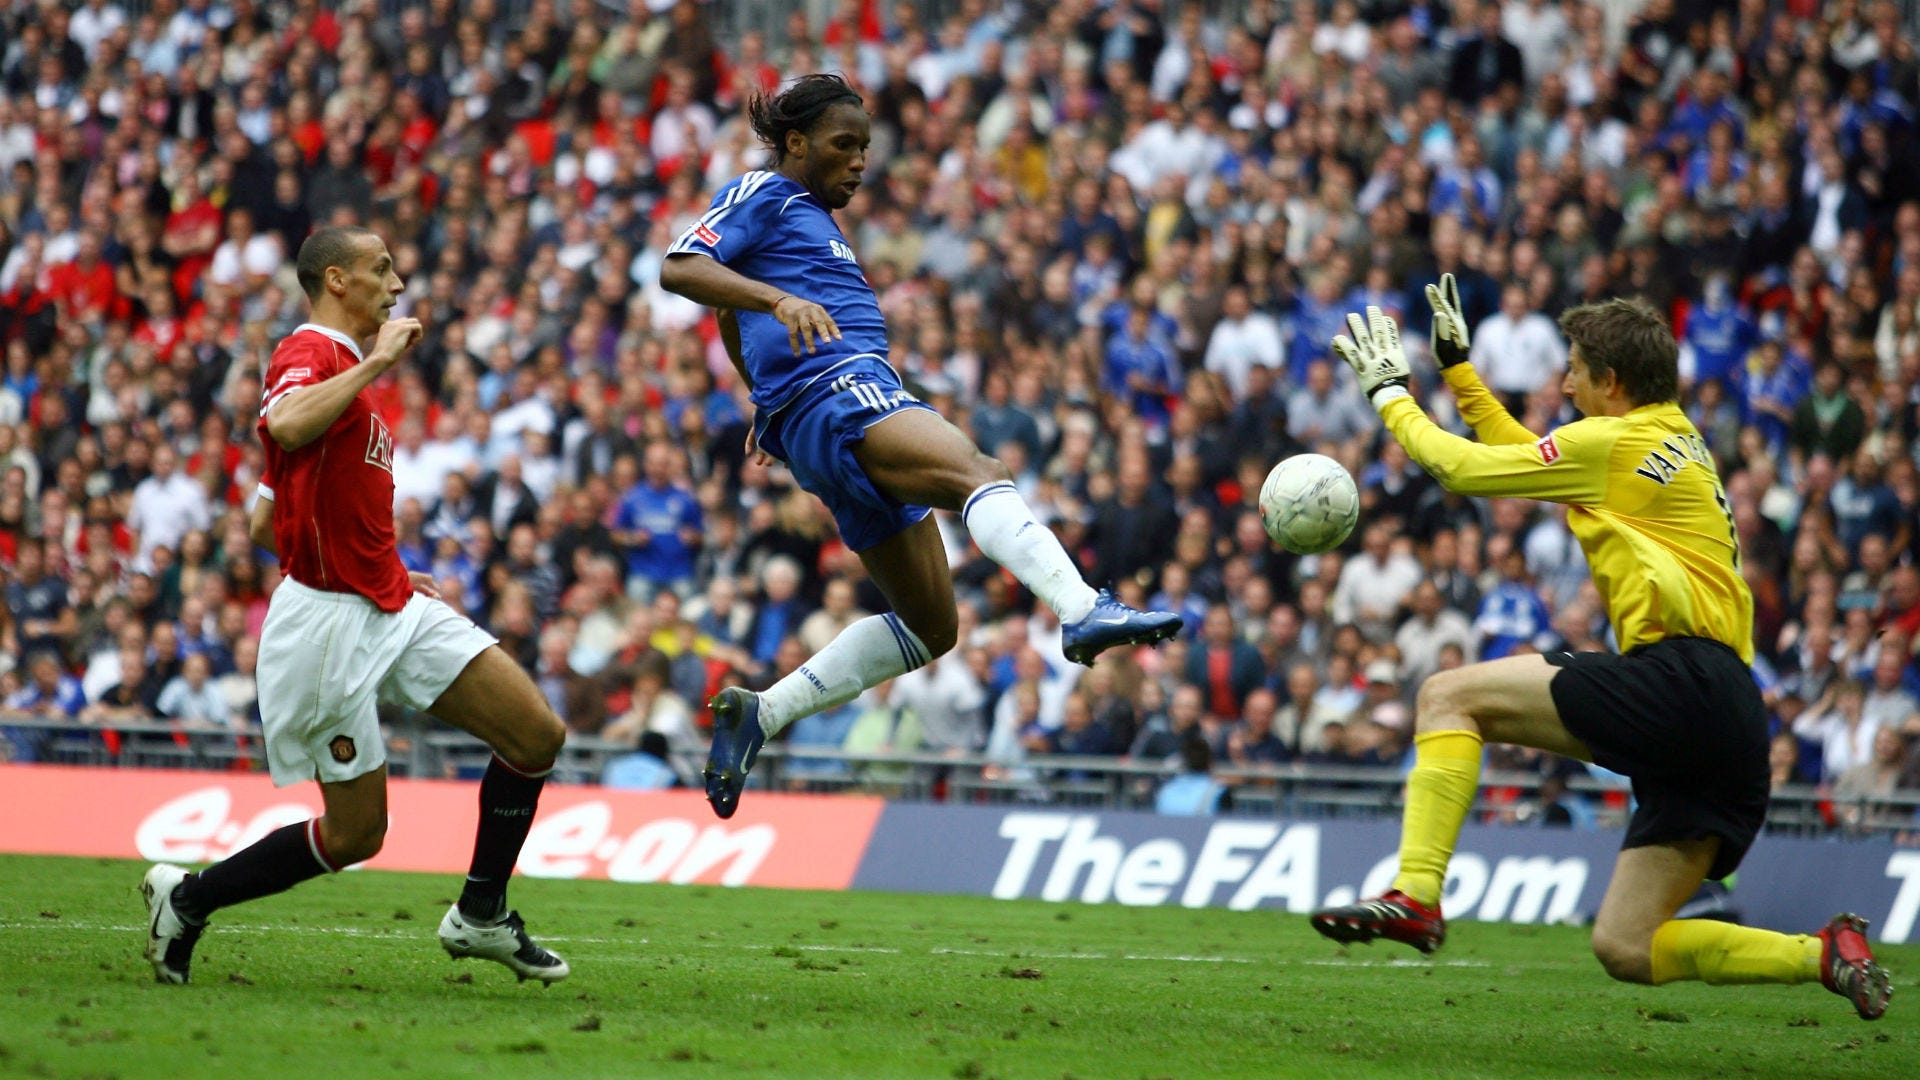 Manchester United Chelsea FA Cup 2007 Didier Drogba